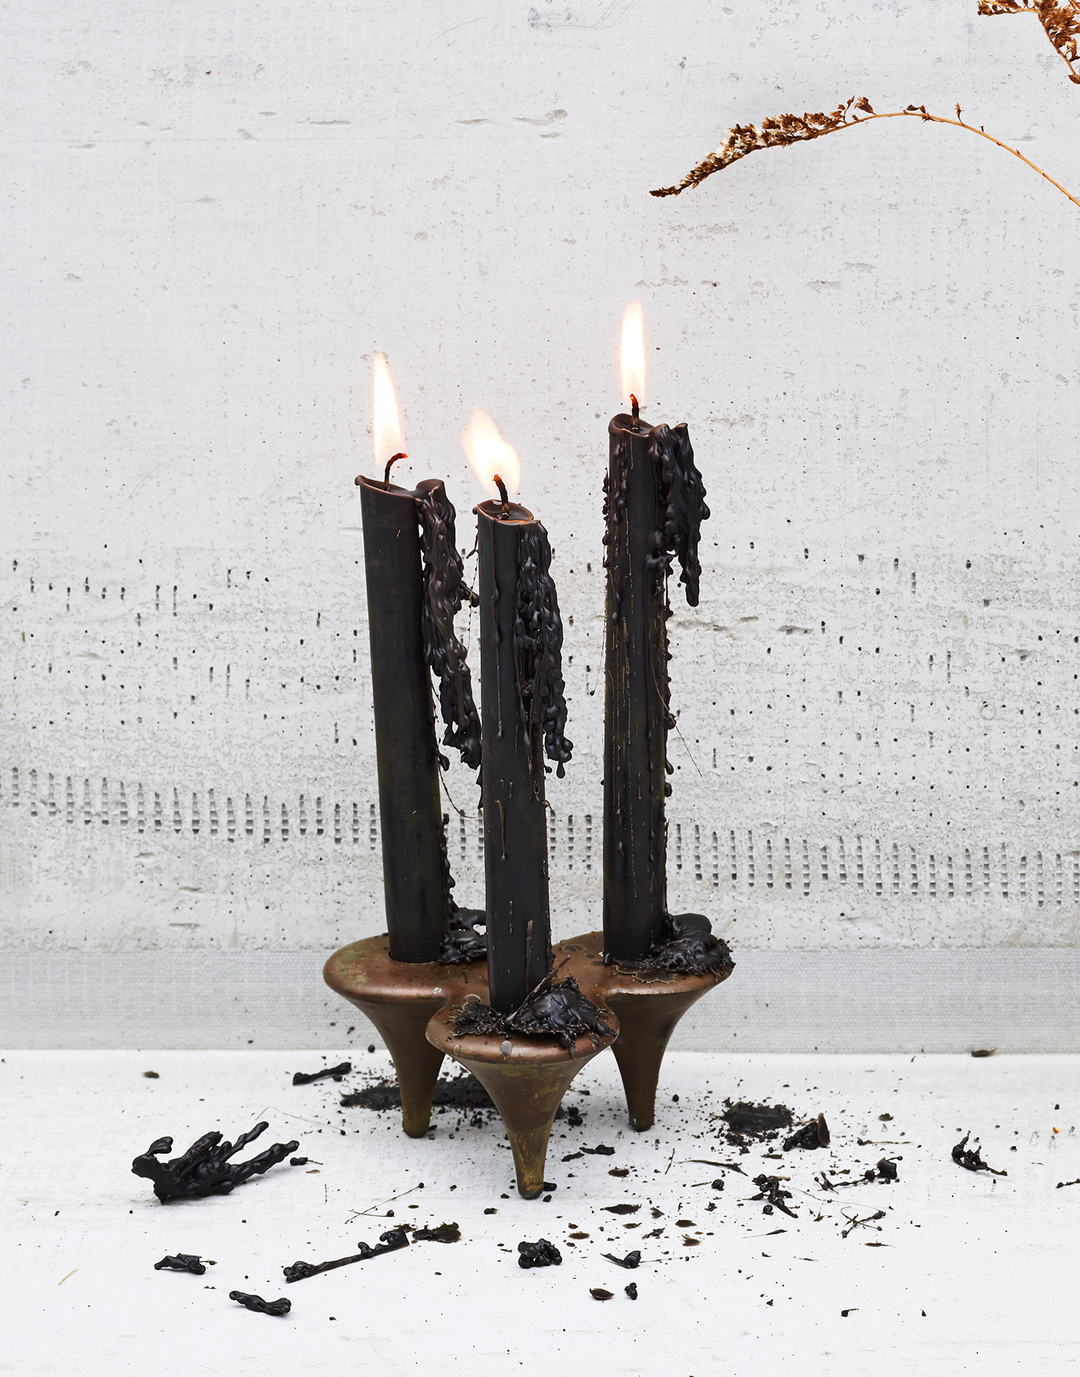 Handcast stake stiletto bronze candlesticks with black candles and dripping black wax on a concrete background